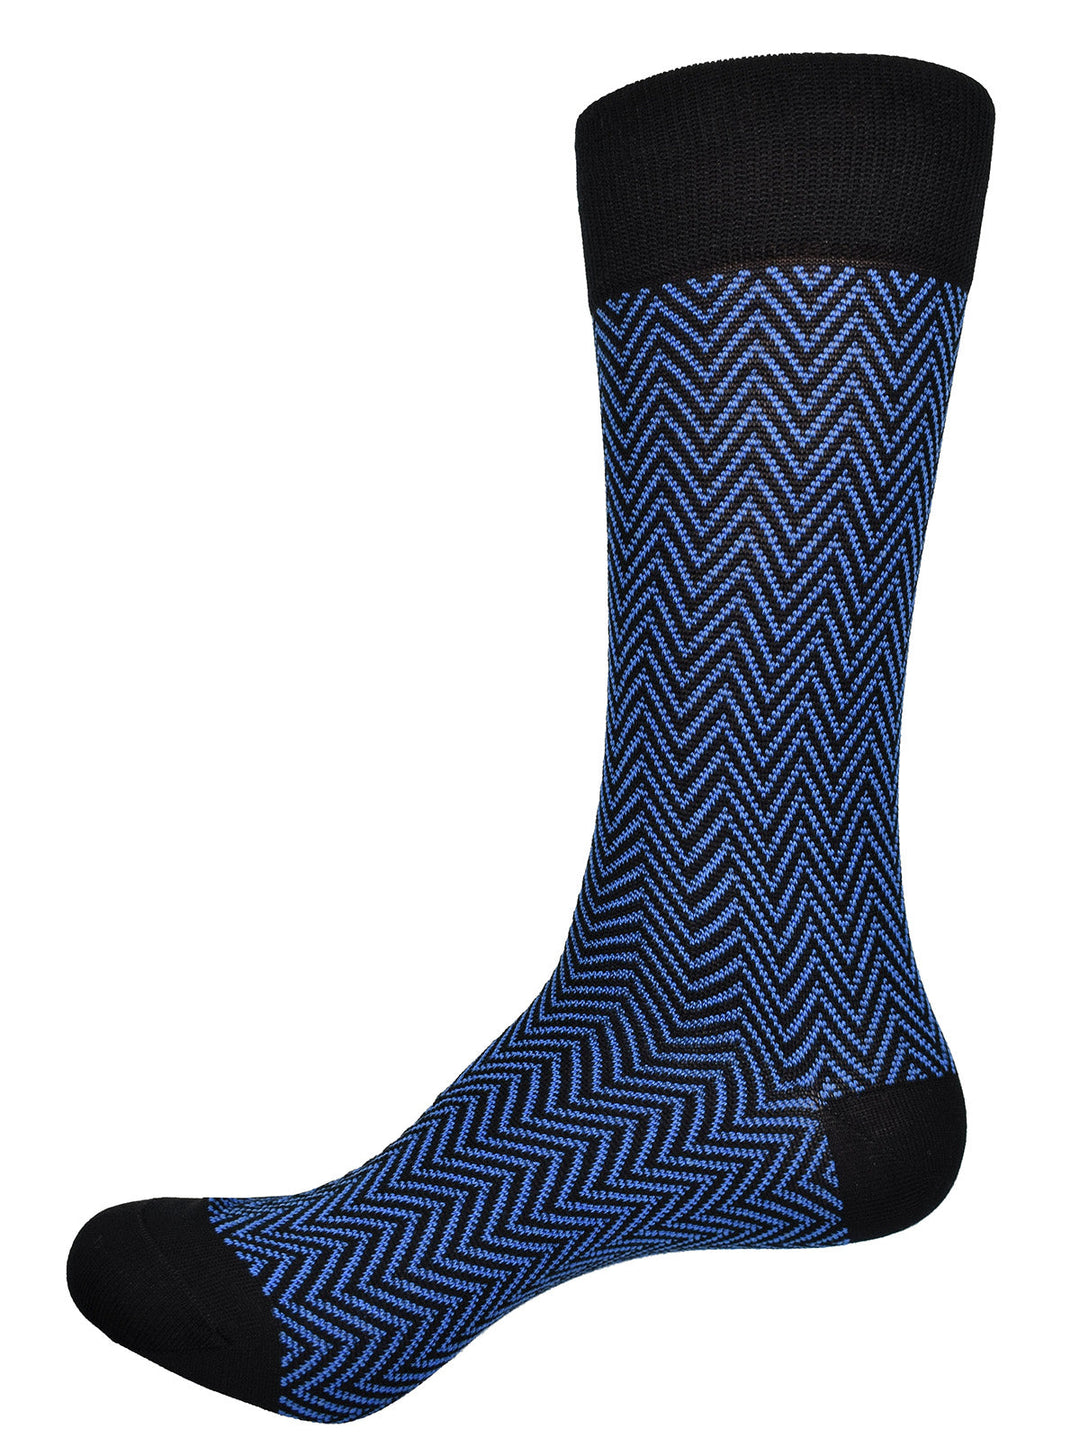 The rich combination of black and navy or royal blue in a timeless chevron type pattern.  Soft mercerized cotton. Classic timeless pattern. Mid calf height. Fits sizes 9 - 12.  Sock by Marcello Sport